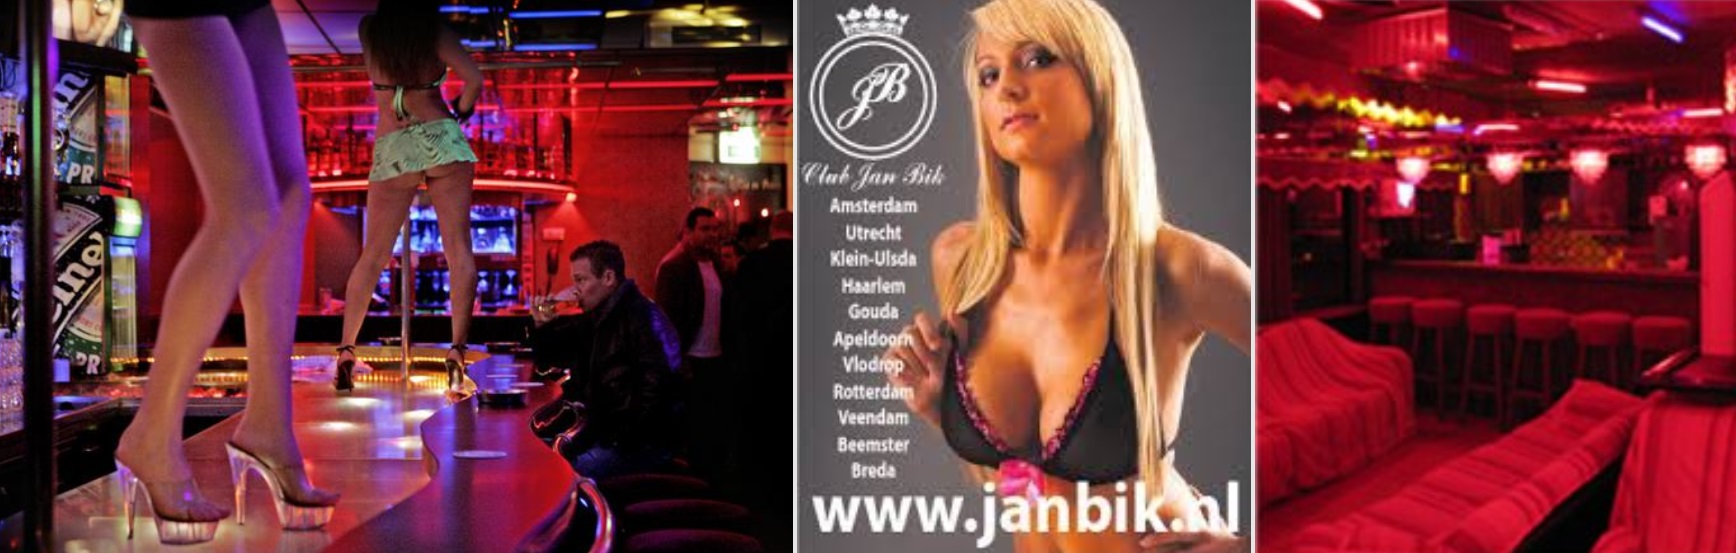 Amsterdam Group Sex - Sex Clubs In Amsterdam Fun With Escorts Drinks and Dance ...